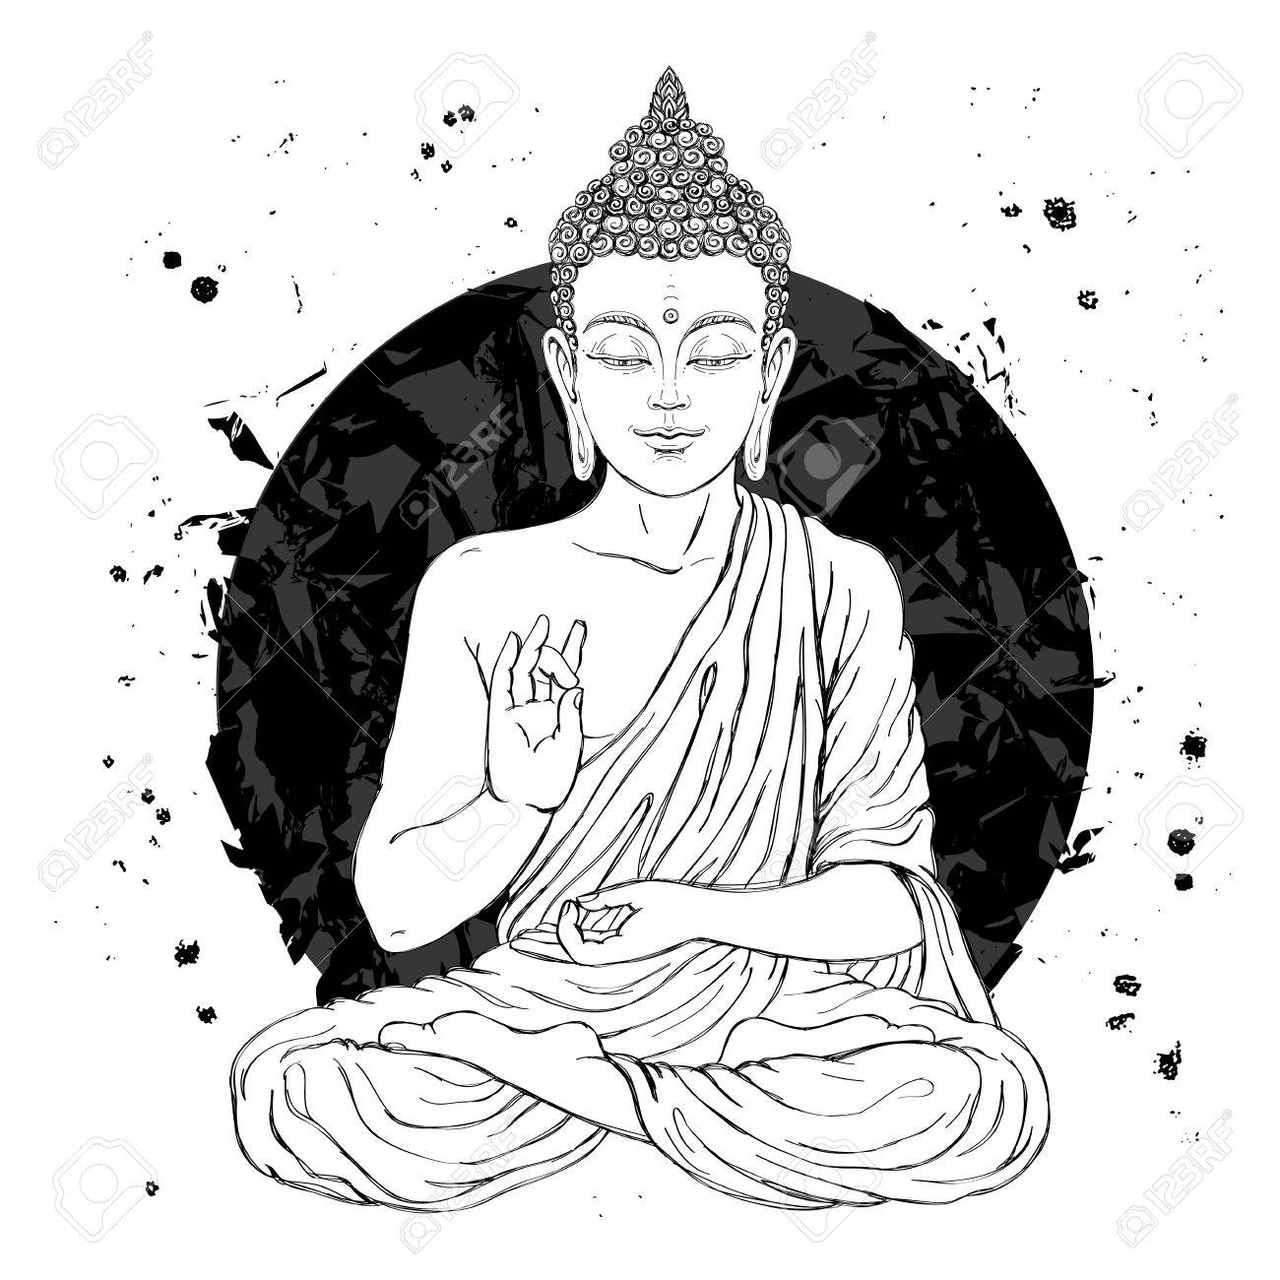 Seated Buddha in the lotus position. Vector illustration on white background with a smear of ink...